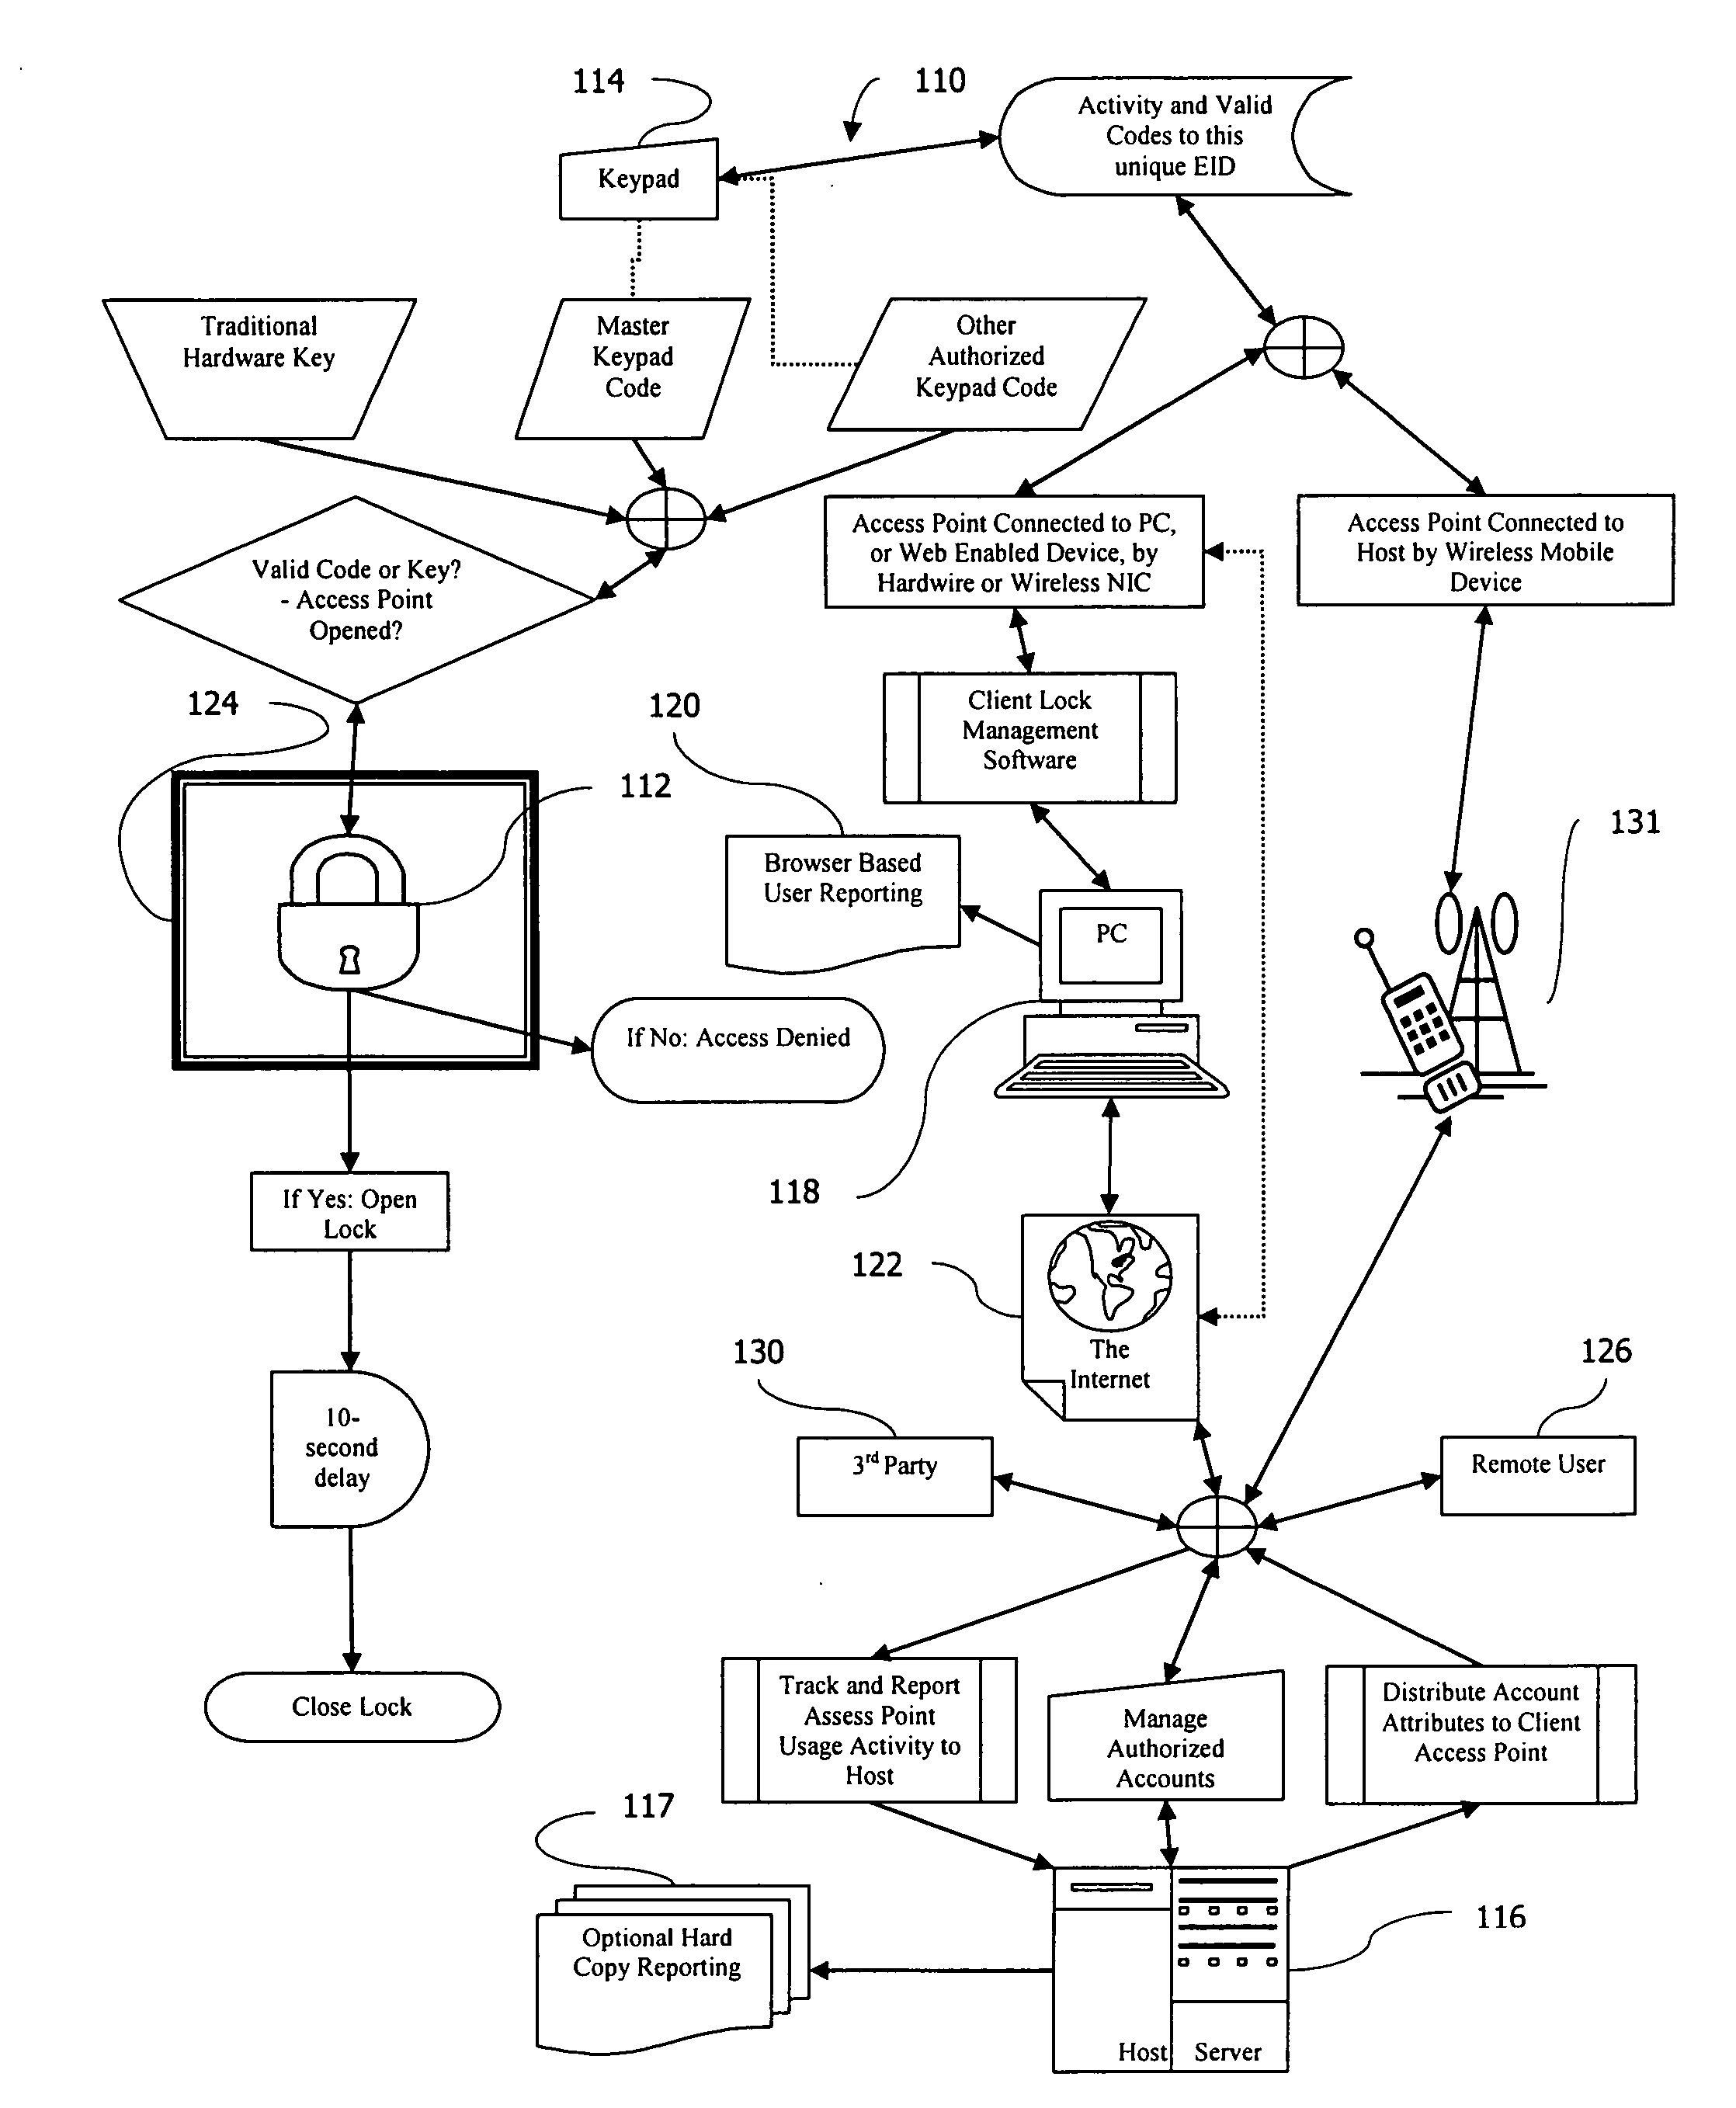 Electronic or automatic identification method to remotely manage the locks or access points to a multi-compartment secure distribution receptacle, via the internet or wireless communication network